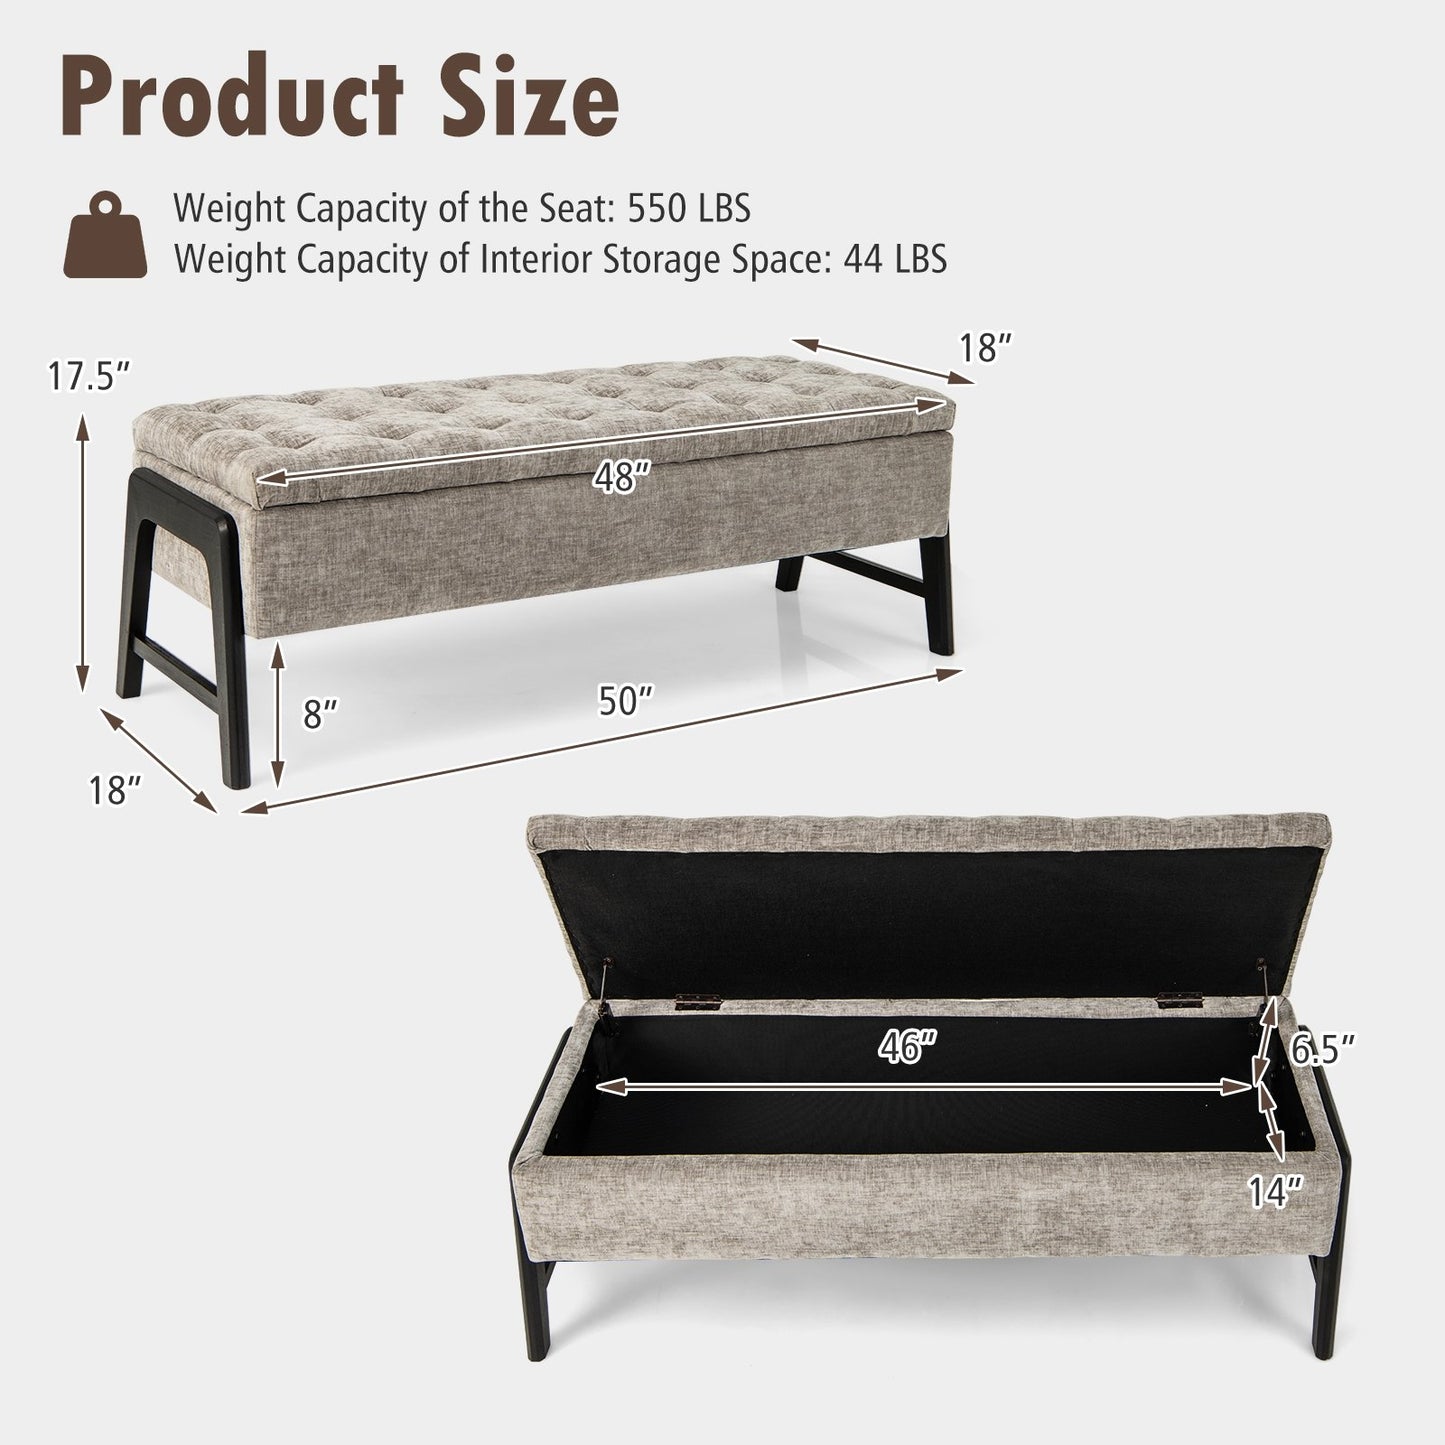 Modern Chenille Storage Bench with Solid Rubber Wood Legs, Gray